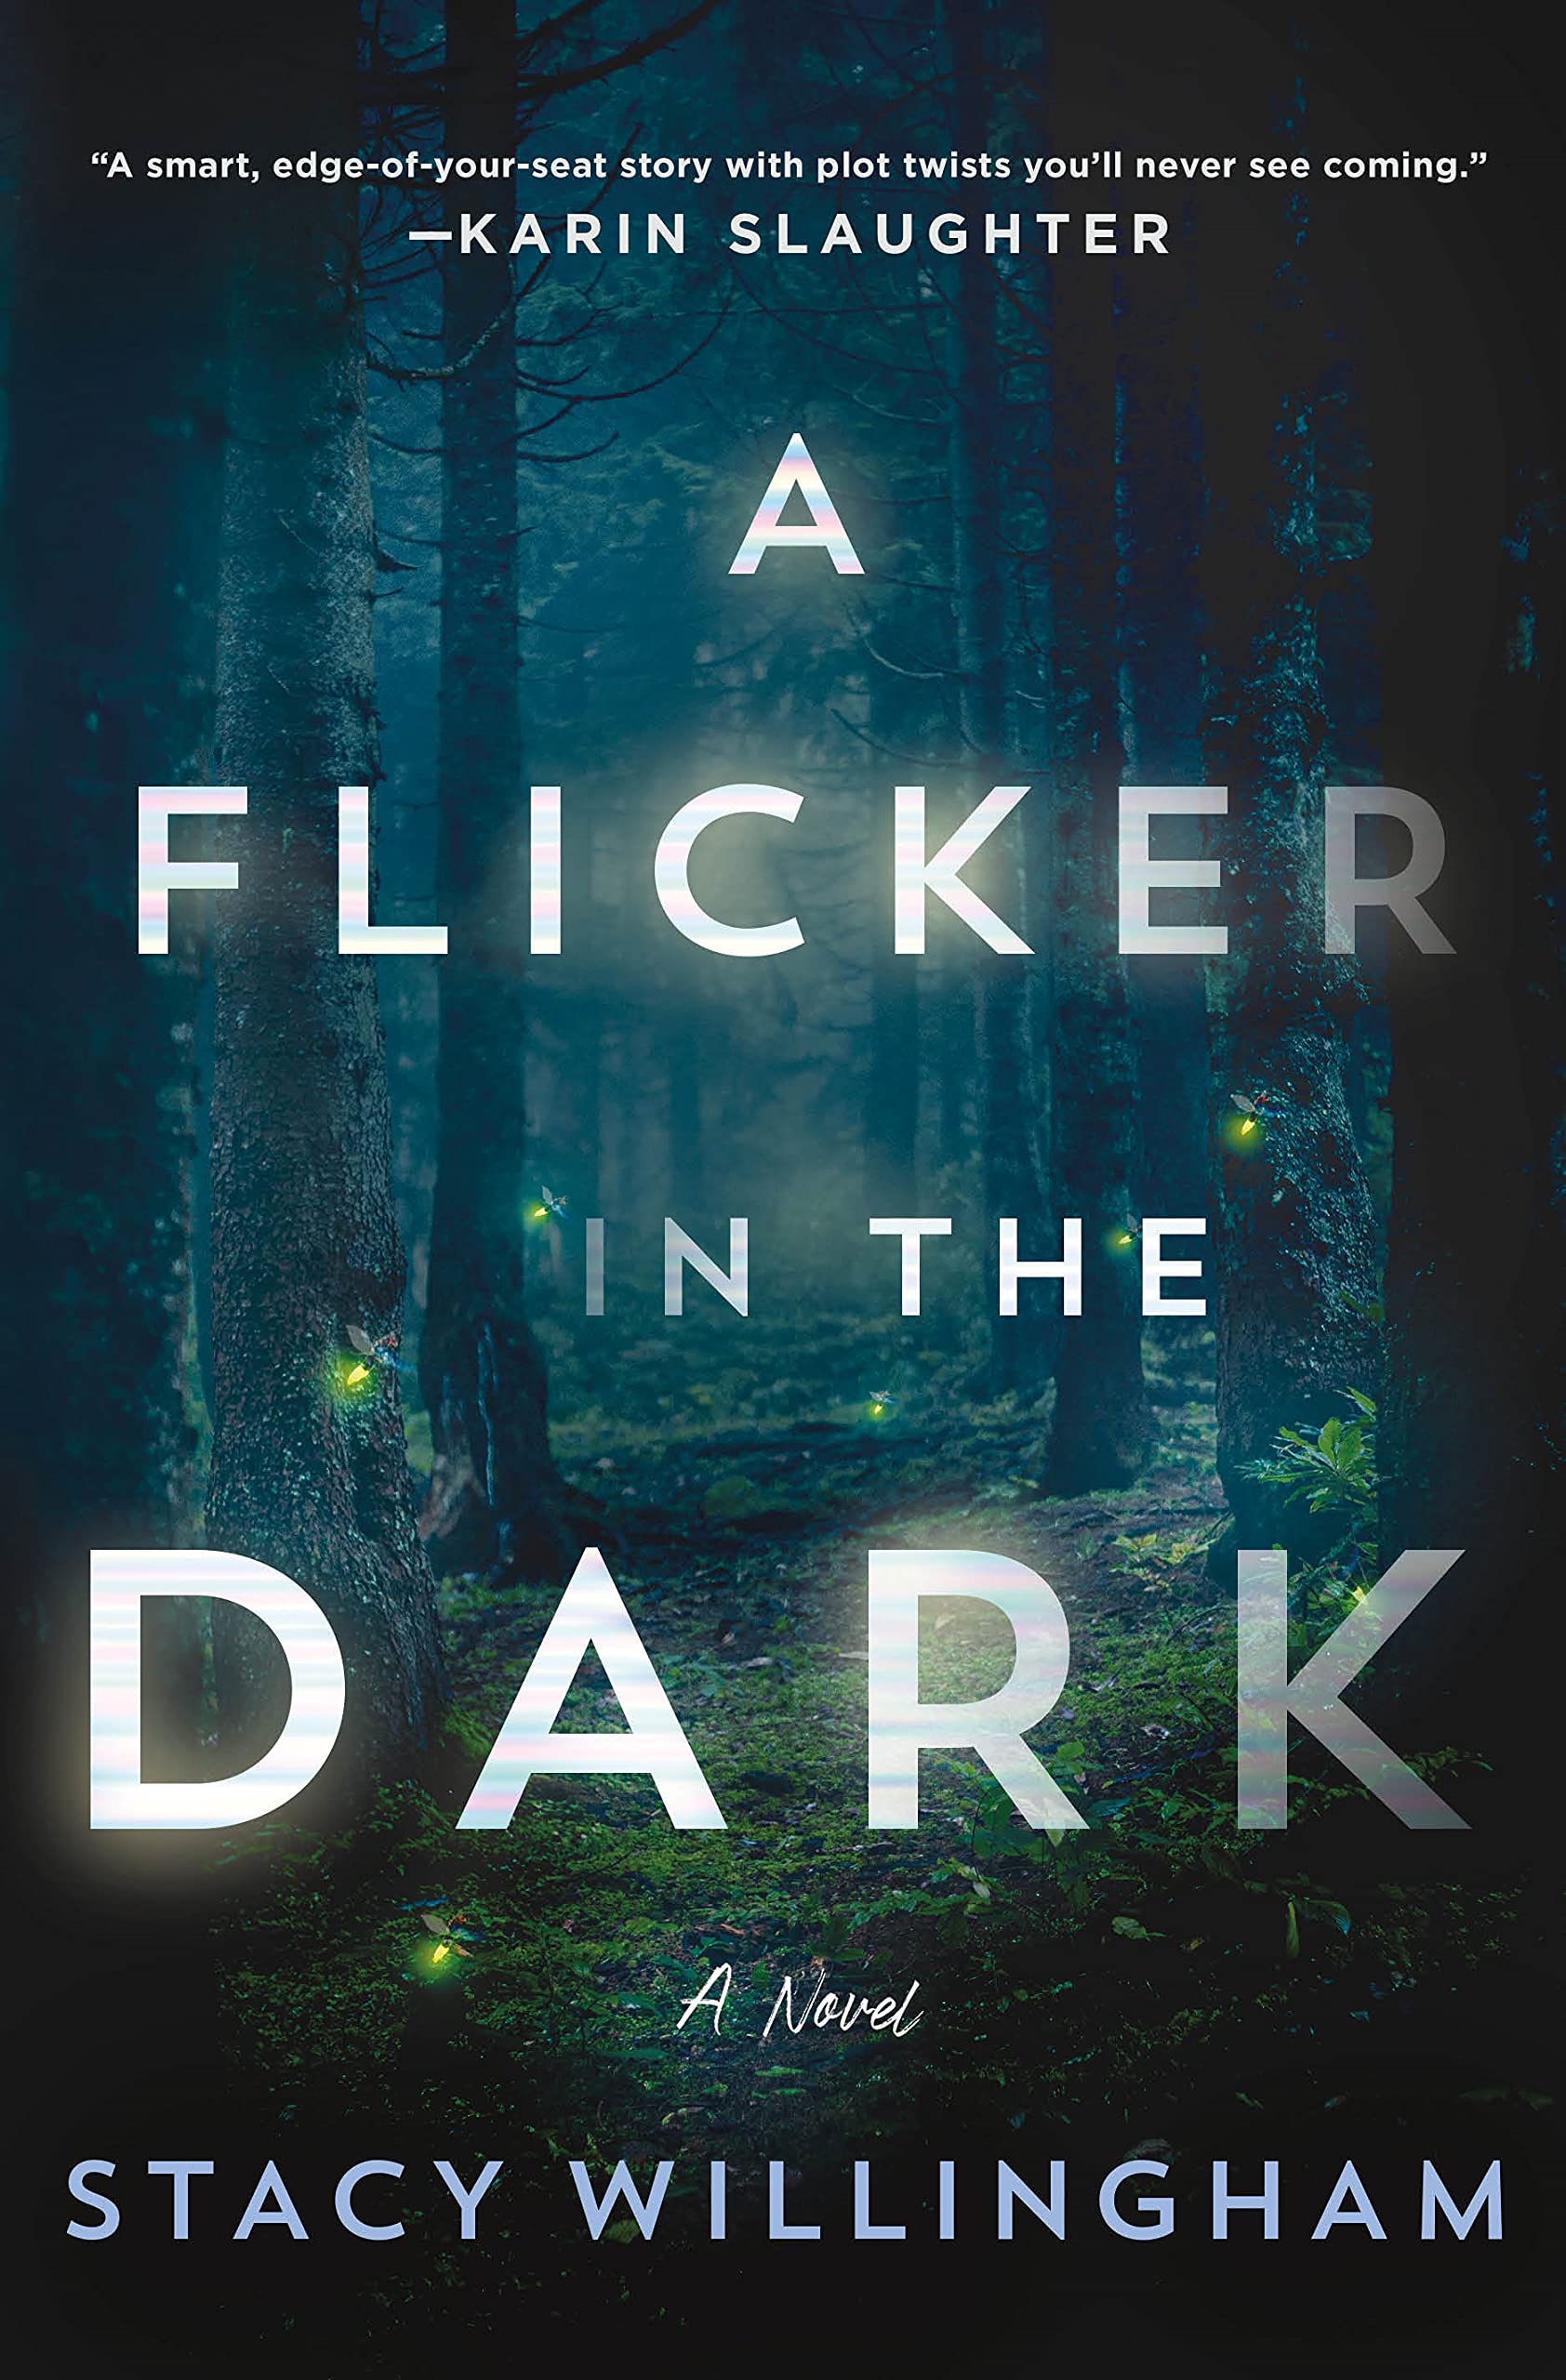 Book cover of A Flicker in the Dar, by Stacy Willingham